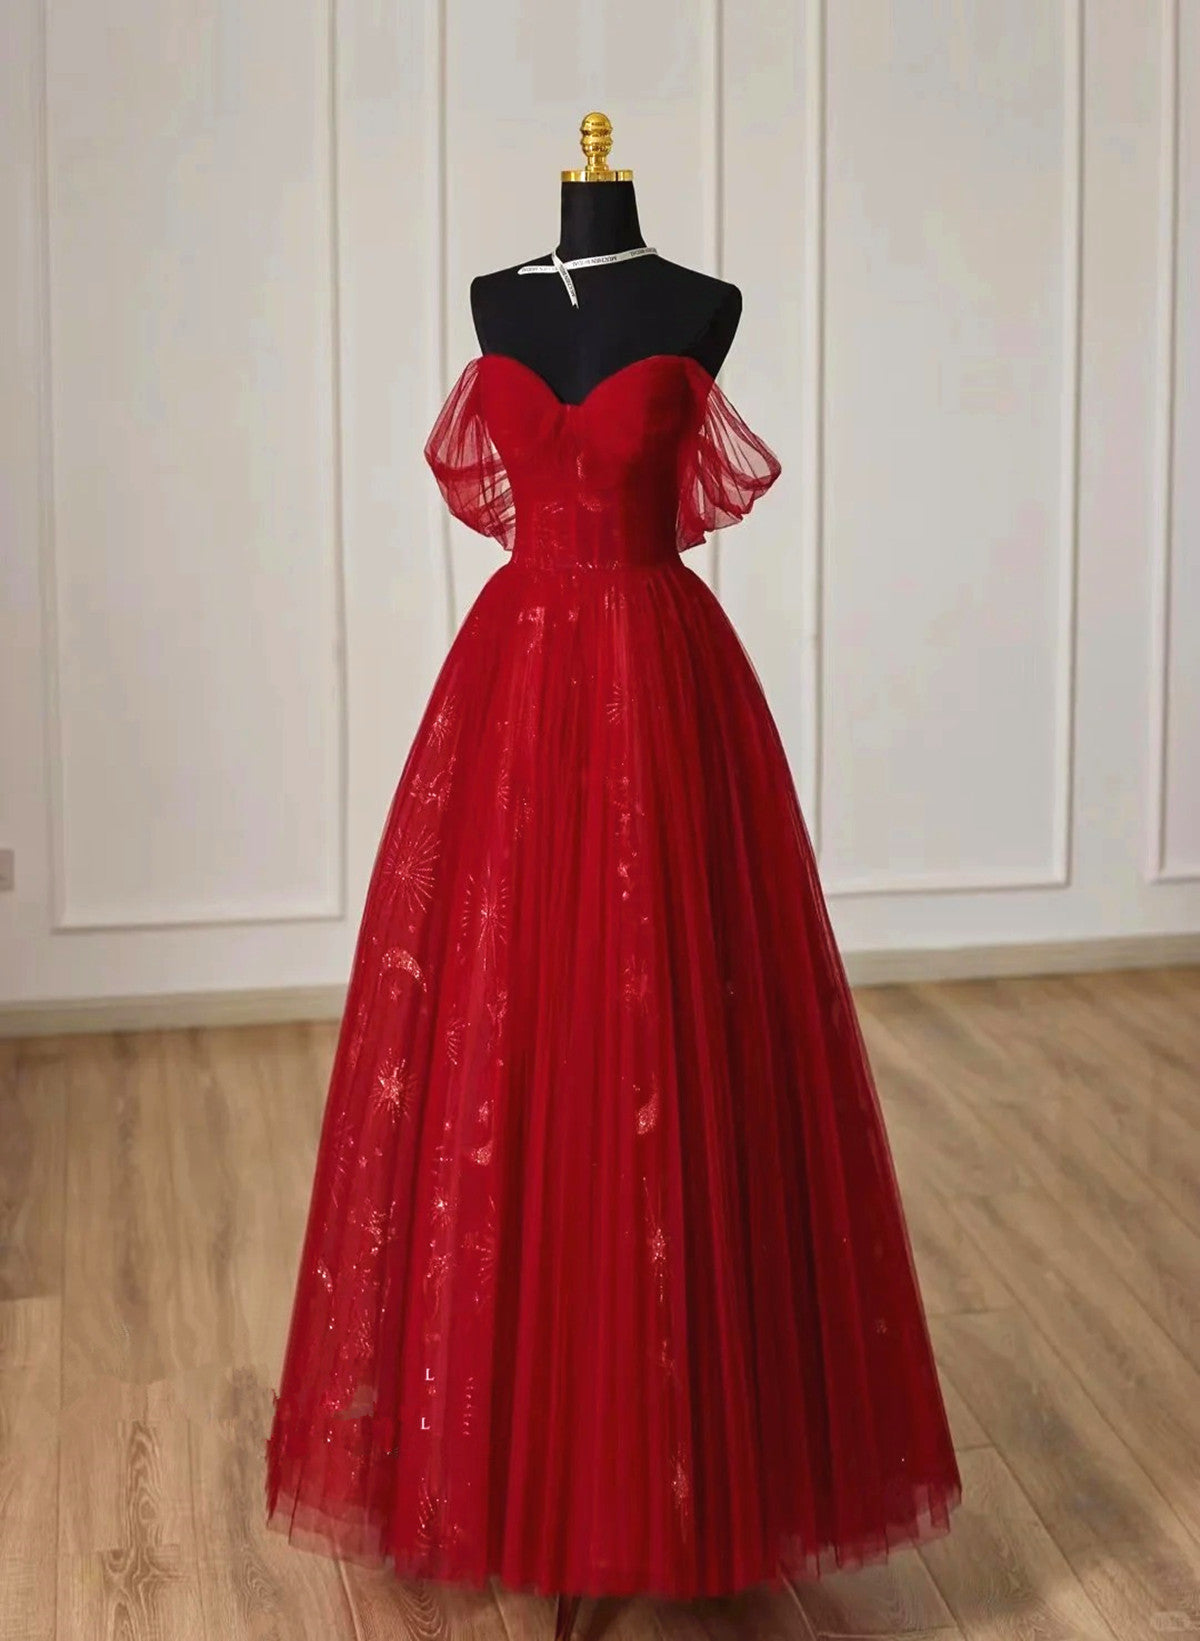 LOVECCRLovely Wine Red Tulle Sweetheart Off Shoulder Prom Dress, Wine Red Long Party Dress